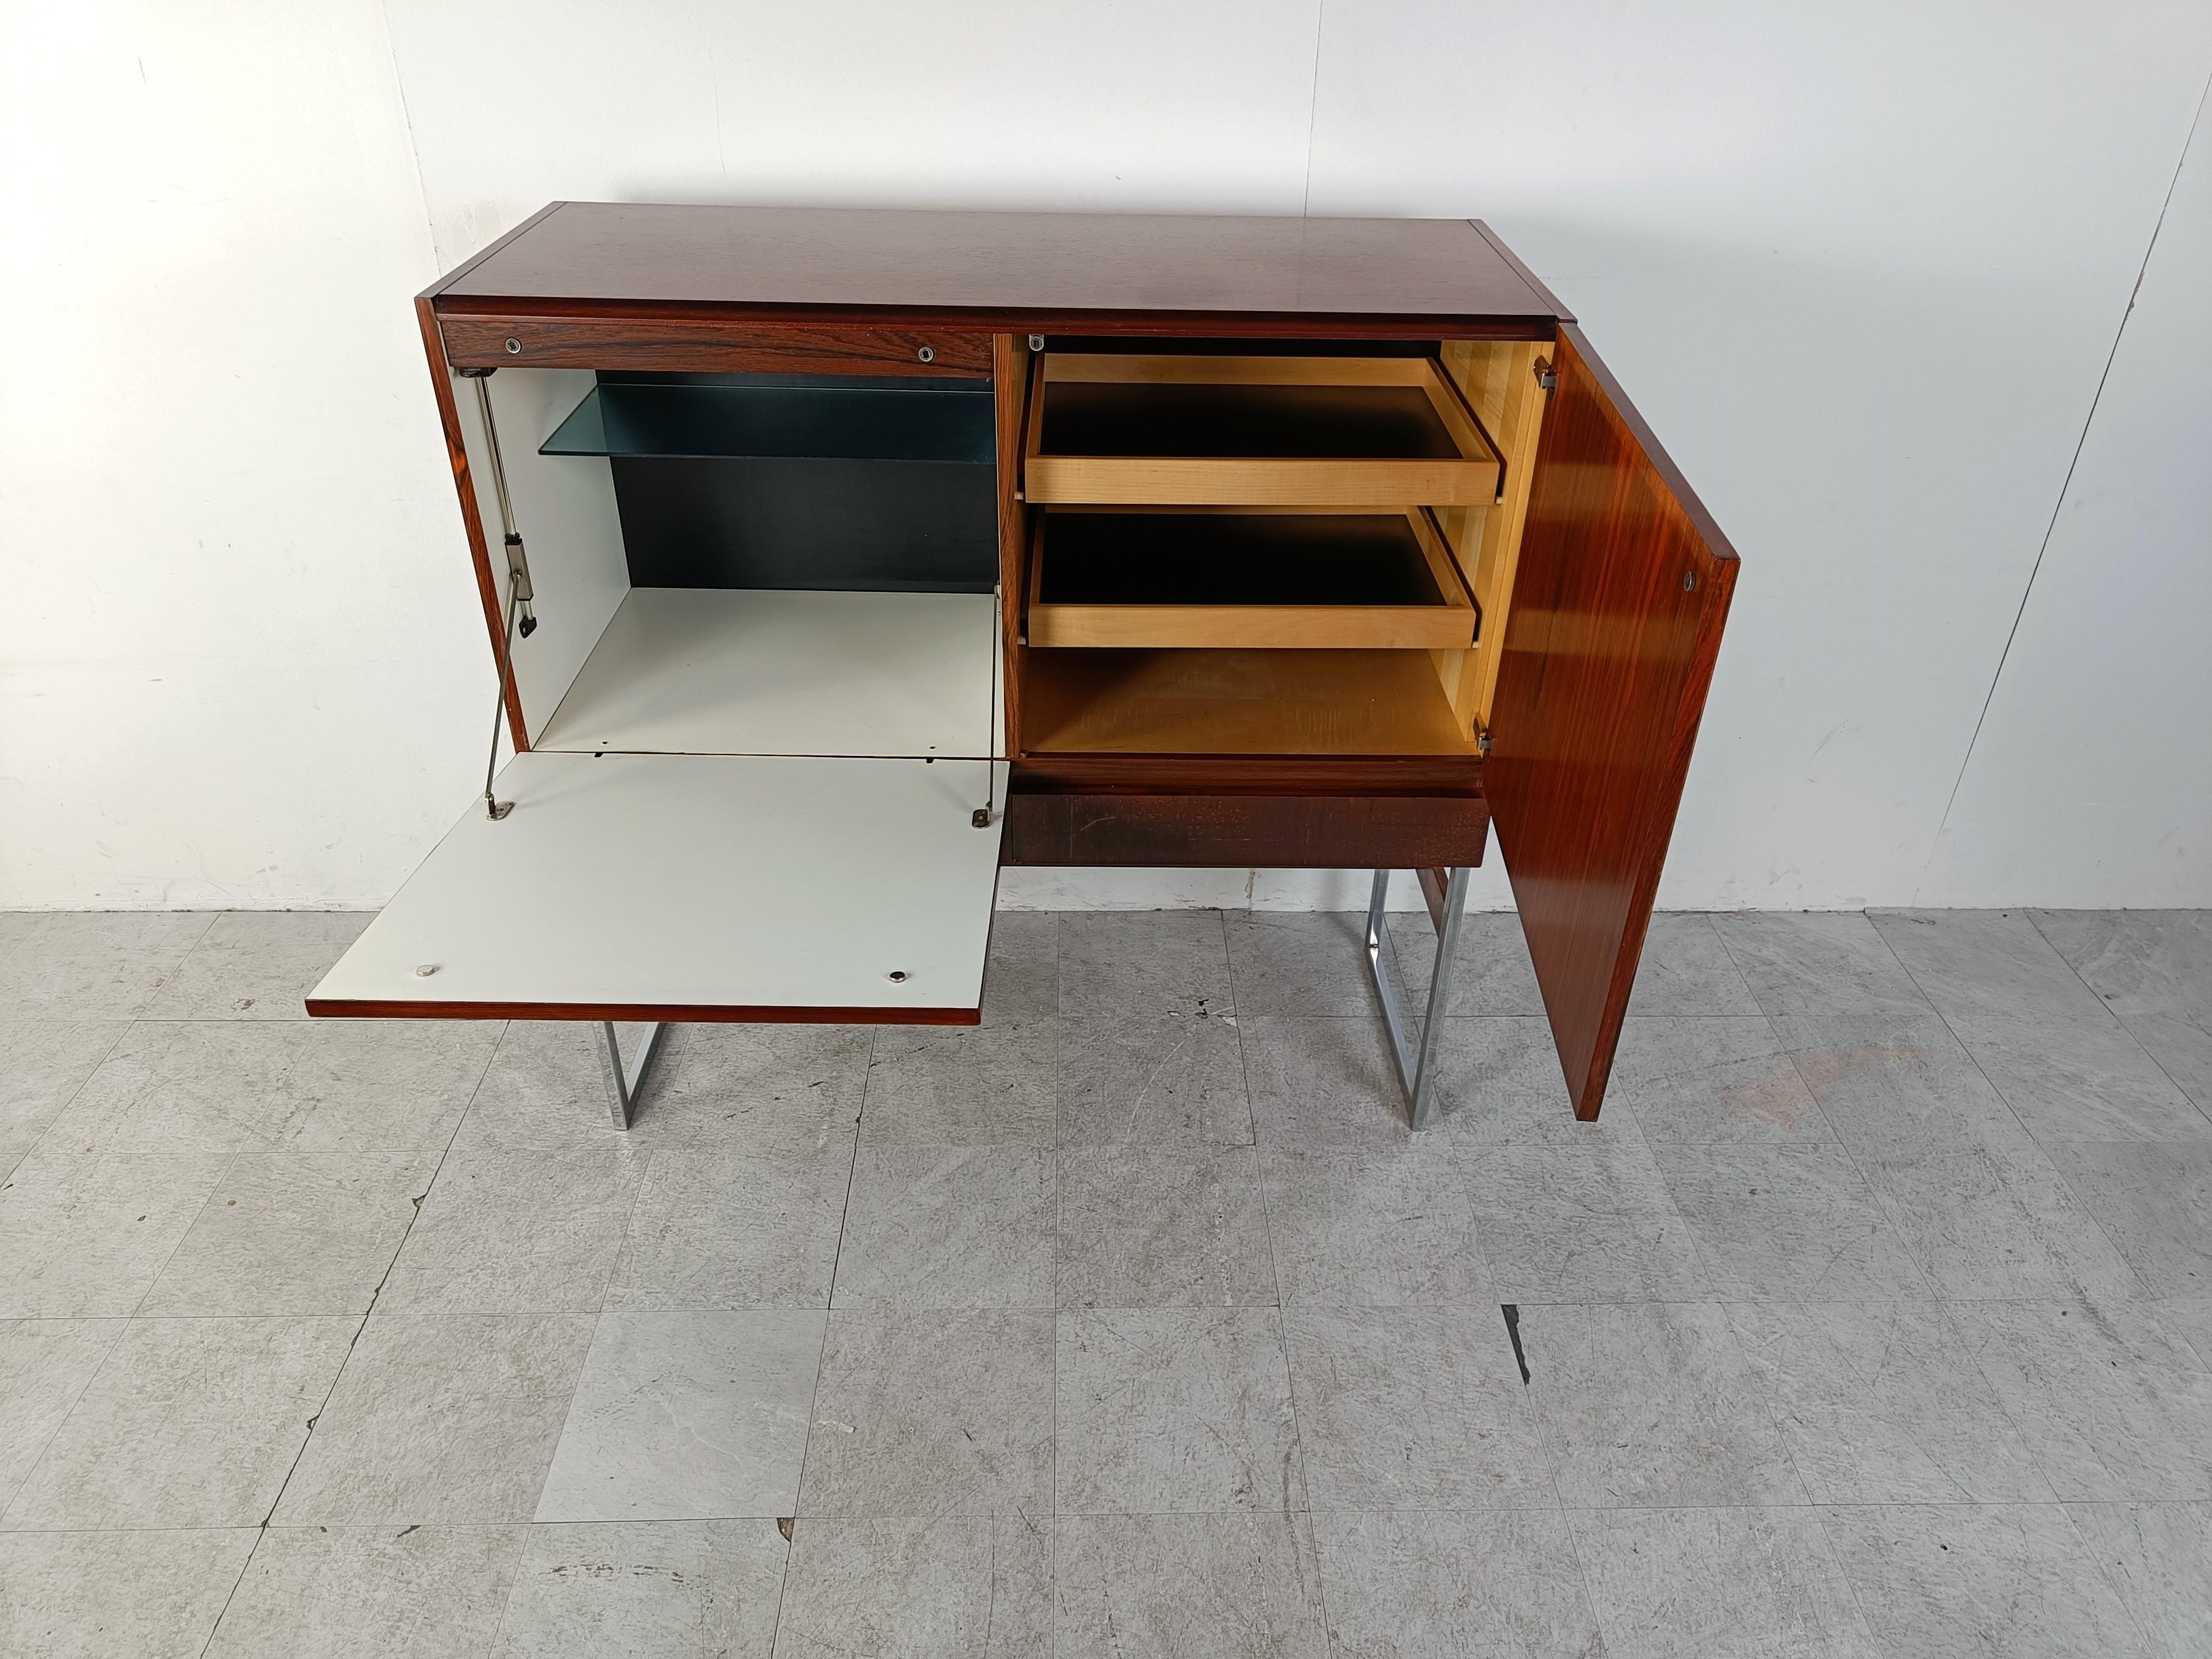 Great looking mid century bar cabinet with beautiful veneer wood and a chrome and wooden base.

The bar cabinet consists of 2 doors and 2 drawers providing loads of storage space.

Very much in the style of Rudolf Glatzel's design, this sideboard